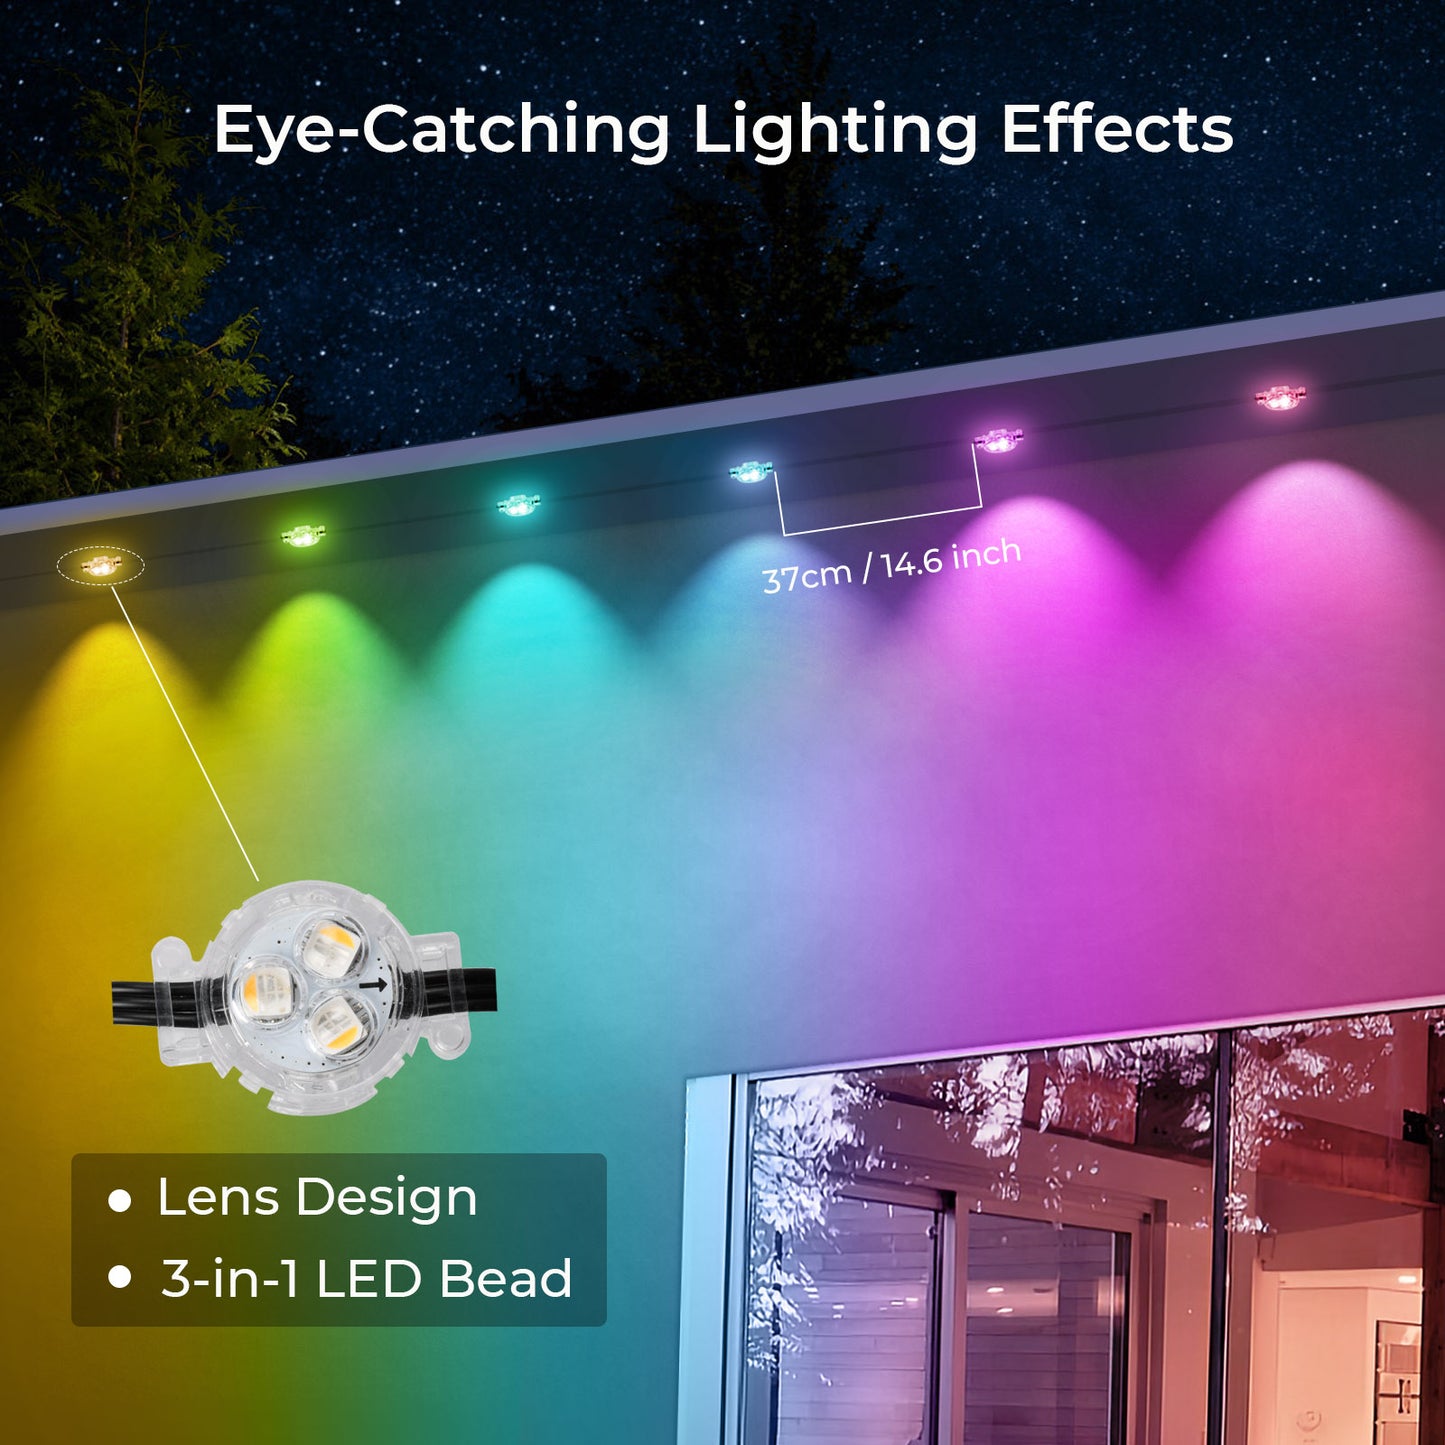 FVTLED Permanent Outdoor String Lights, 100ft WiFi Smart Dynamic RGB+WW Multi-Color Outdoor Lights, IP65 Waterproof 72 LED Eaves Lights for Party, Christmas Day, Game Day, Daily Lighting